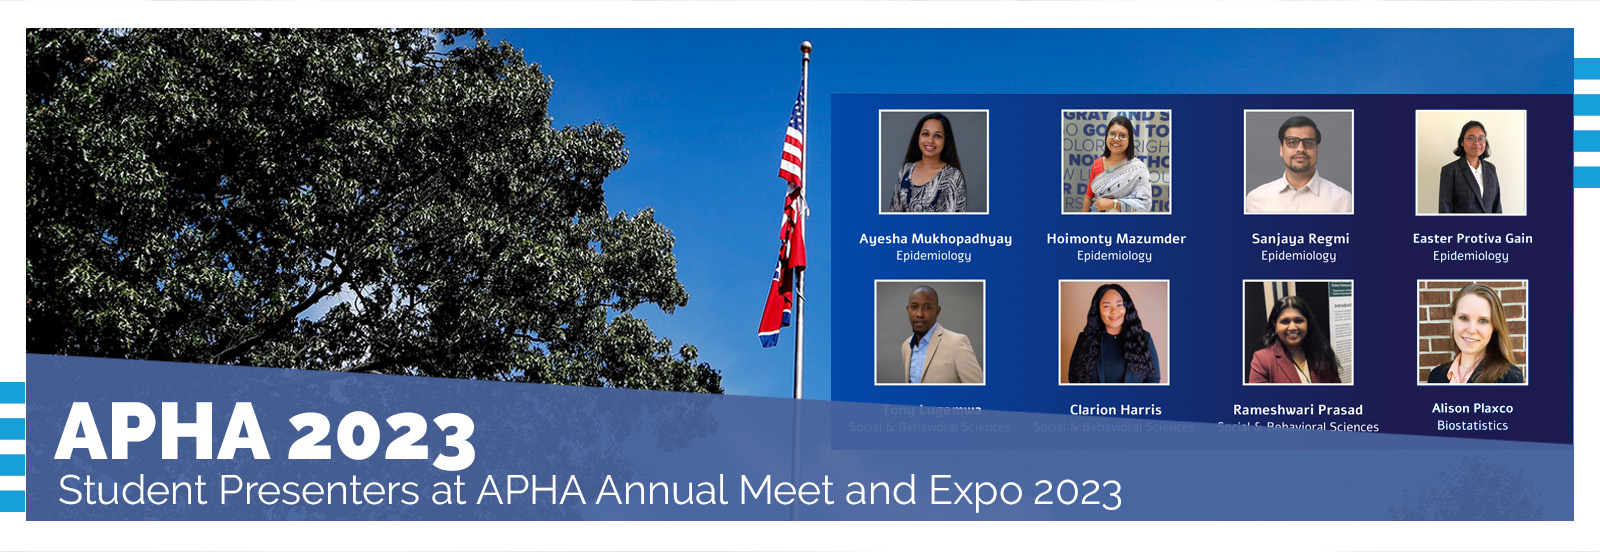 Collage of headshots of student presenters at APHA annual meet and Expo 2023